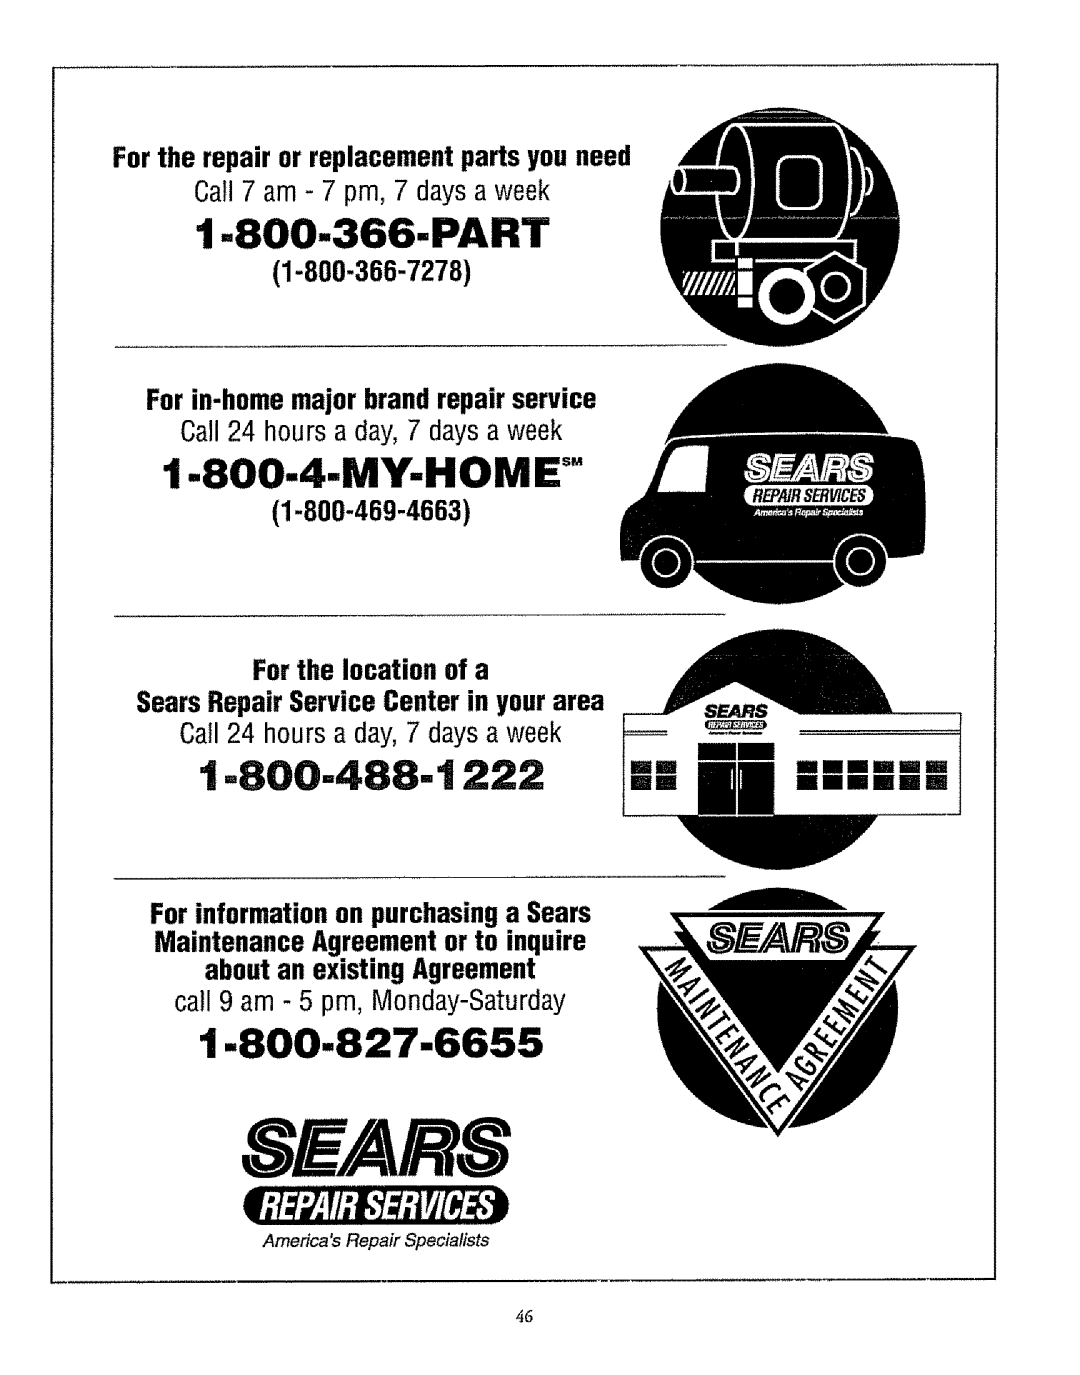 Sears 72675, 72671, 75471, 72678, 73271, 75376, 72676, 75378, 75375, 73278, 73465 Part, My-Home, 1-800-488-1222, 1-800-827-6655 